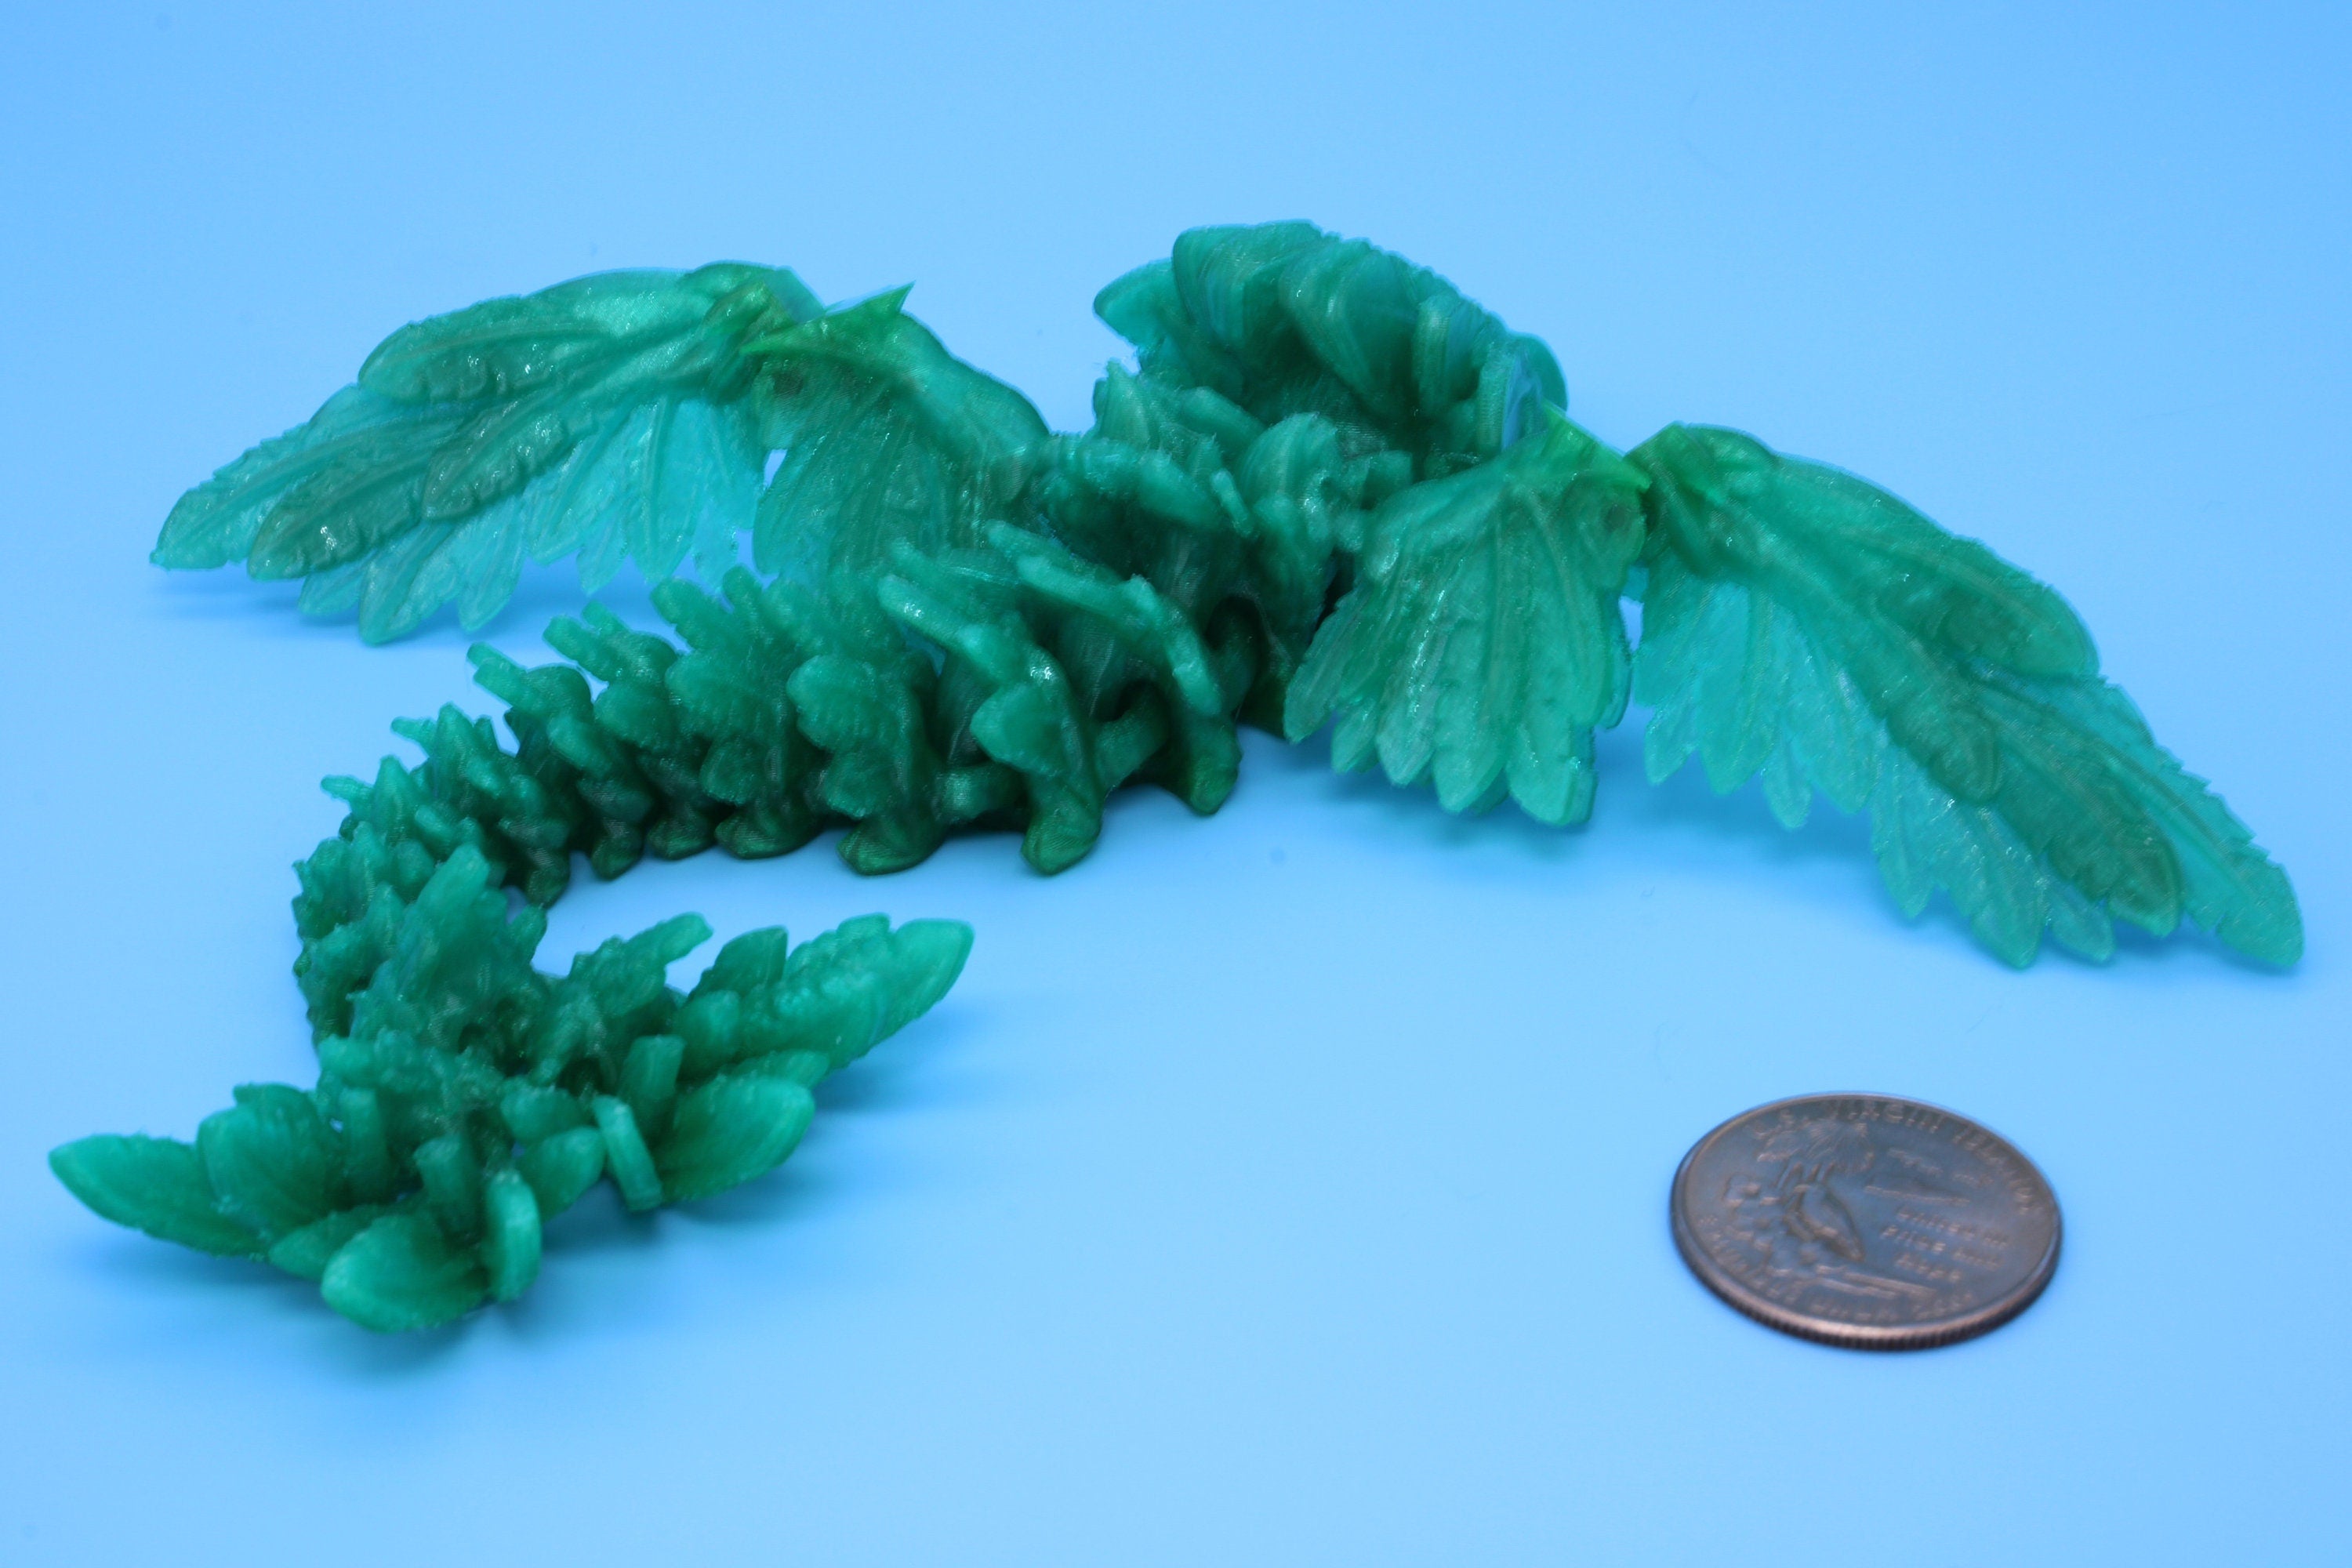 Baby Flying Serpent-Green | 3D printed TPU | Flexible Miniature | 7 in.